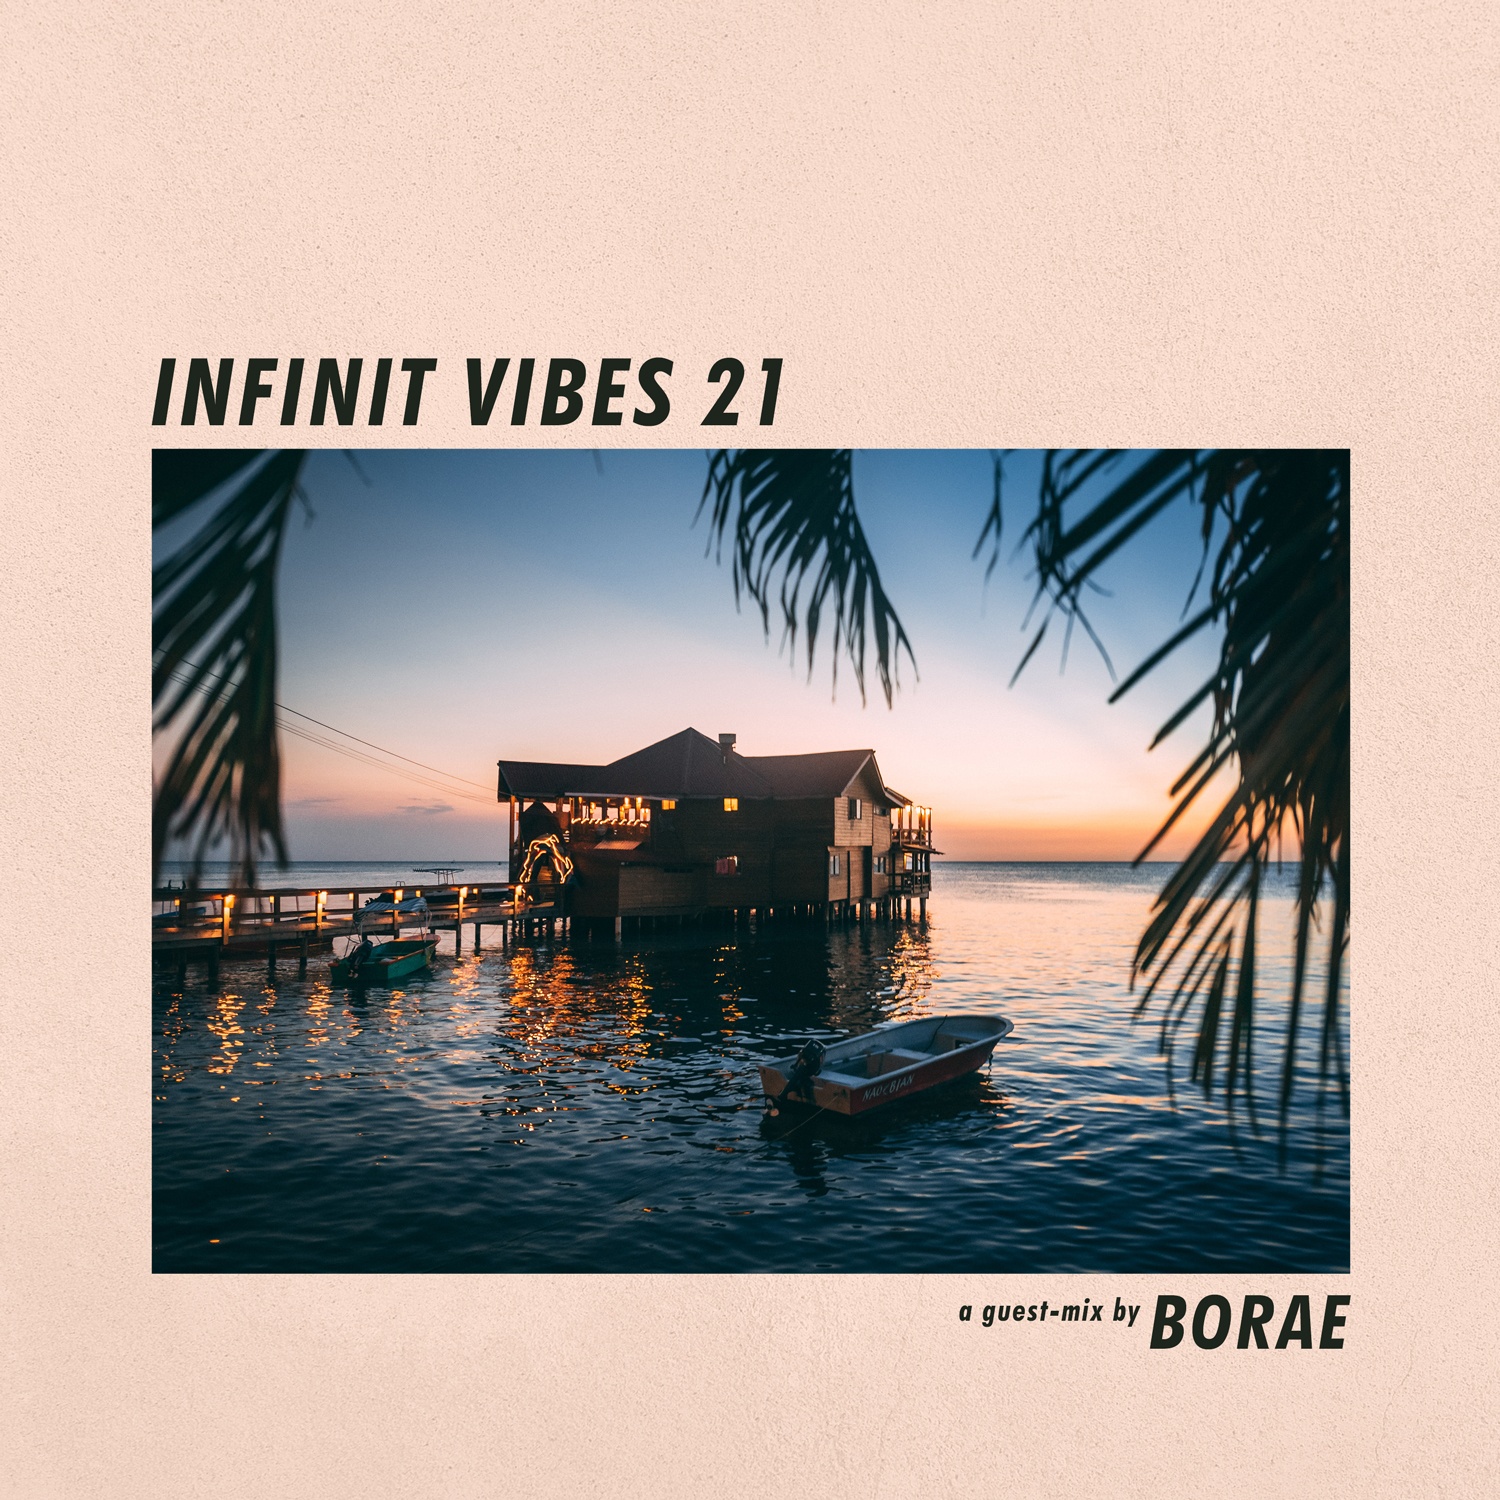 INFINIT VIBES 21 - A guest-mix by BORAE